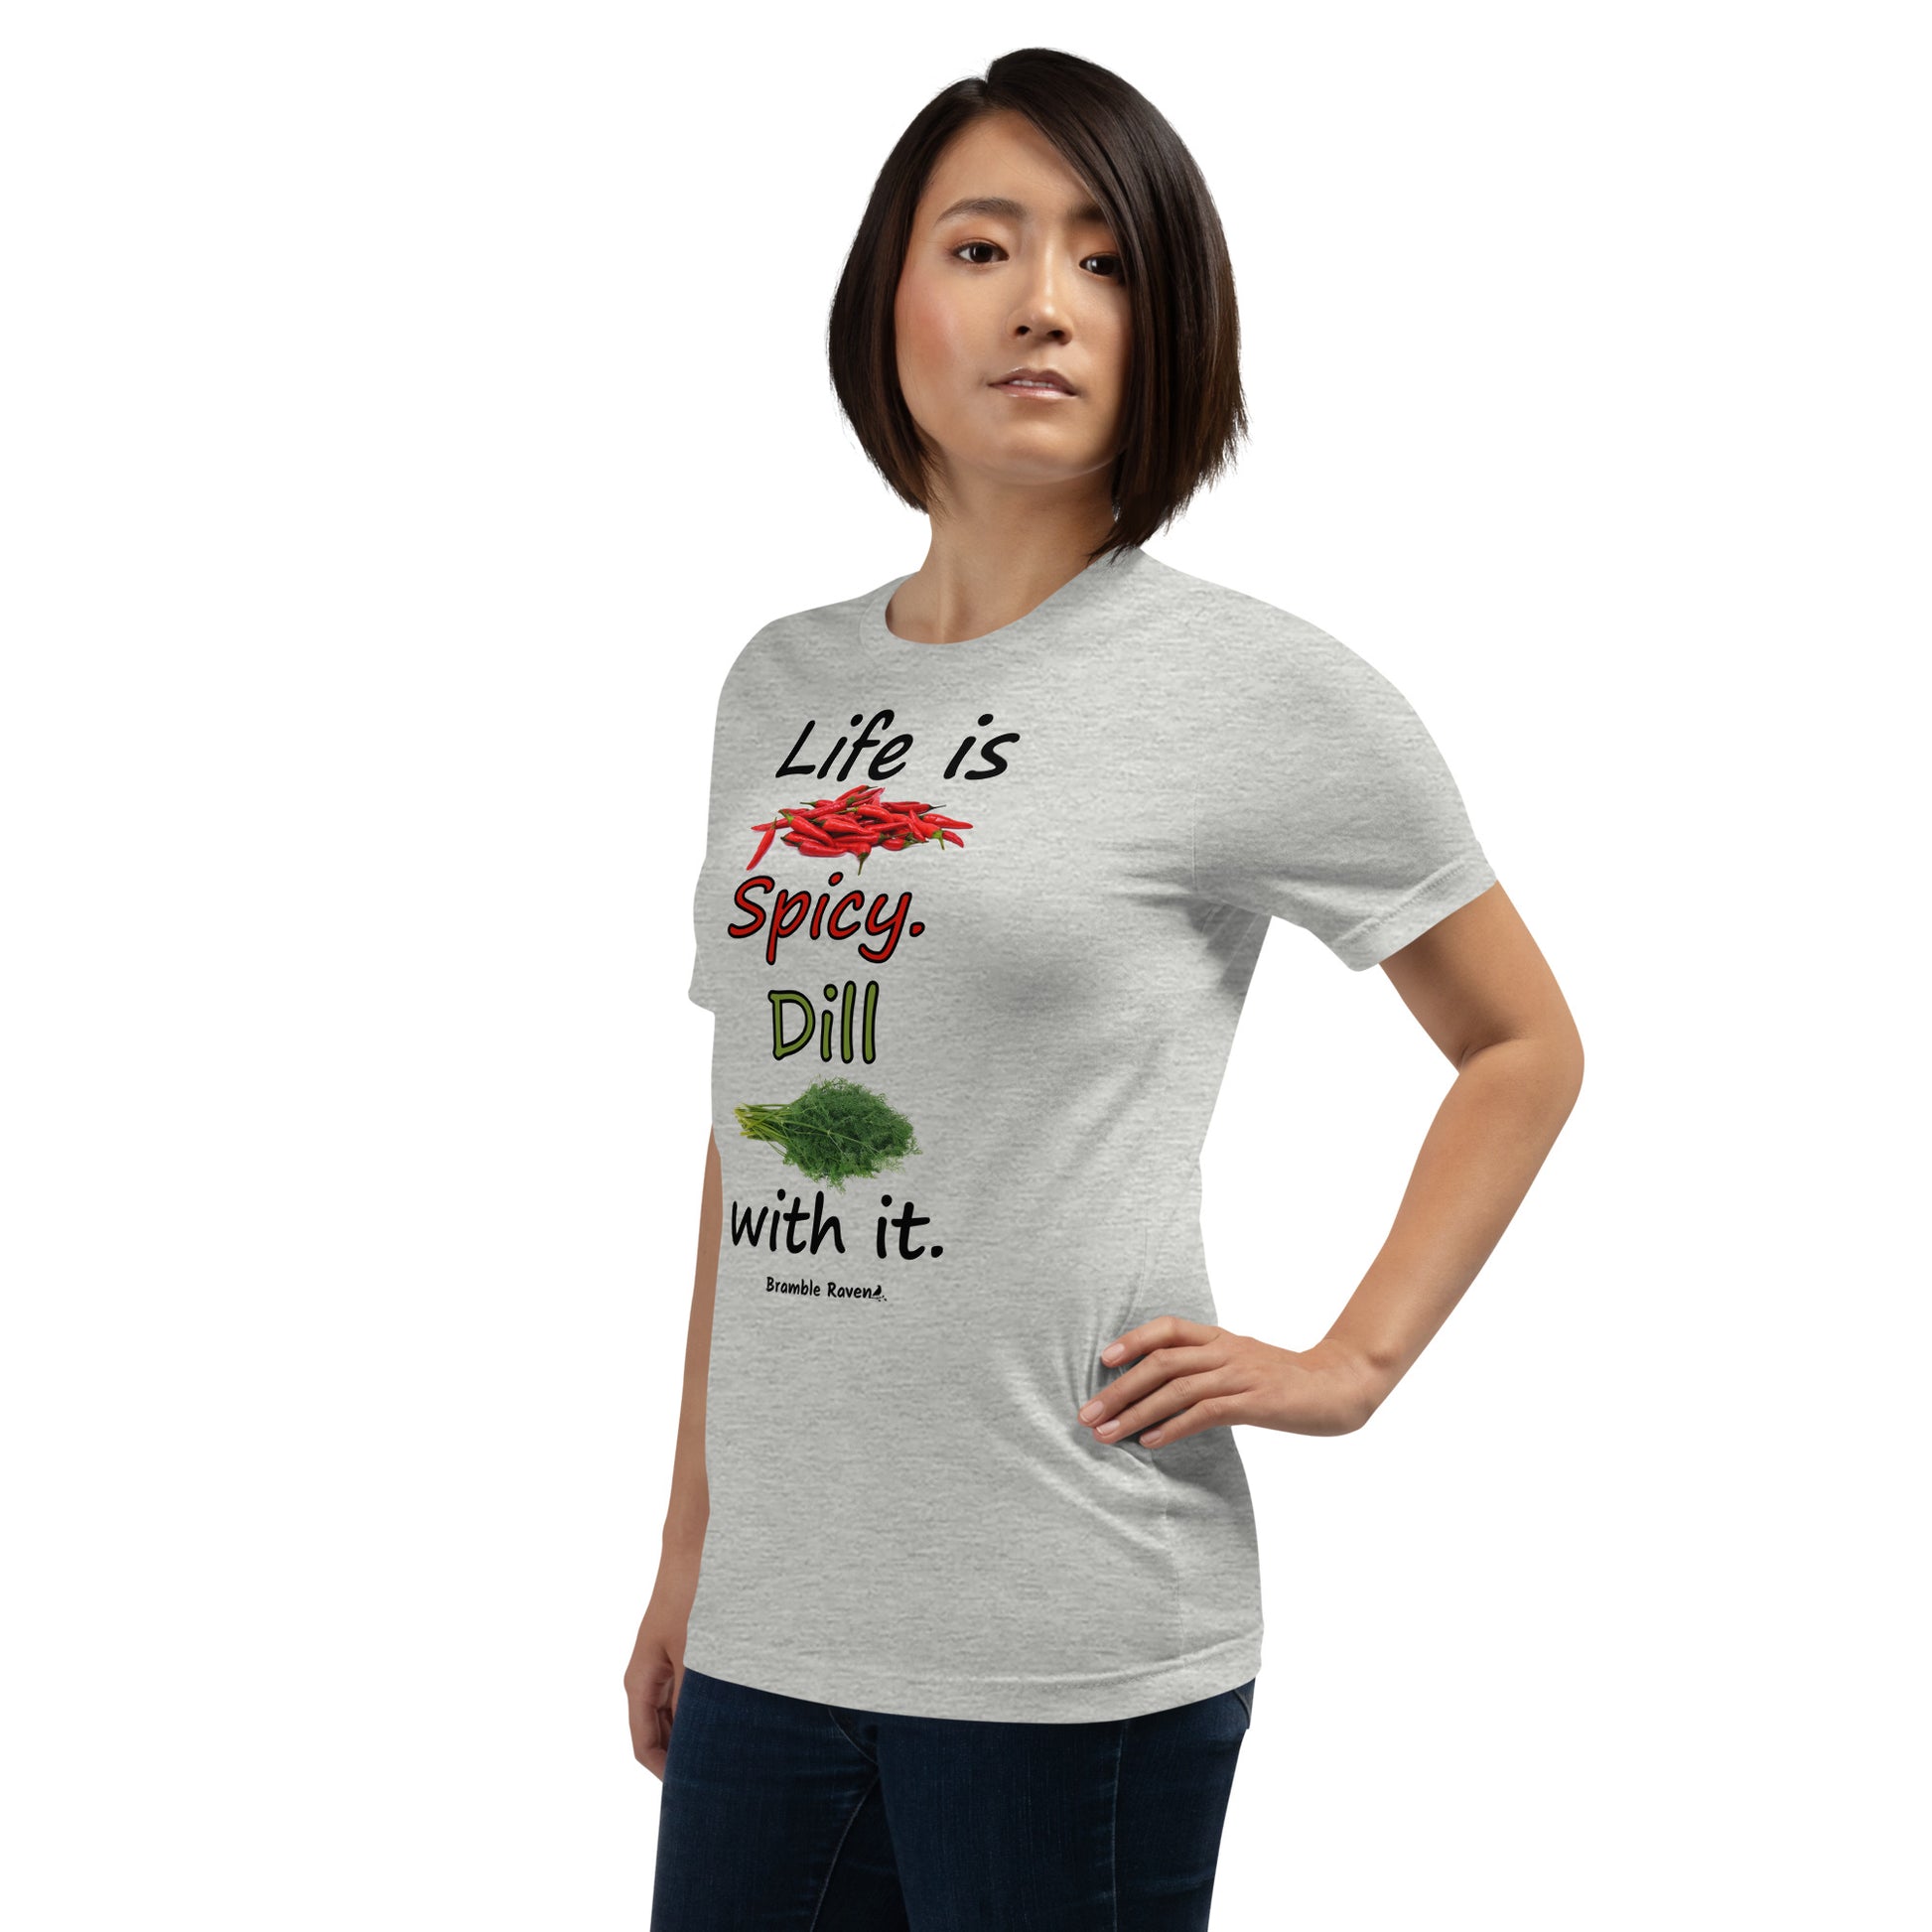 Athletic heather grey colored unisex t-shirt. Features text: Life is Spicy. Dill with it. Graphic of chili peppers and dill weed. Made of preshrunk cotton with side seams. Shown on female model facing left.